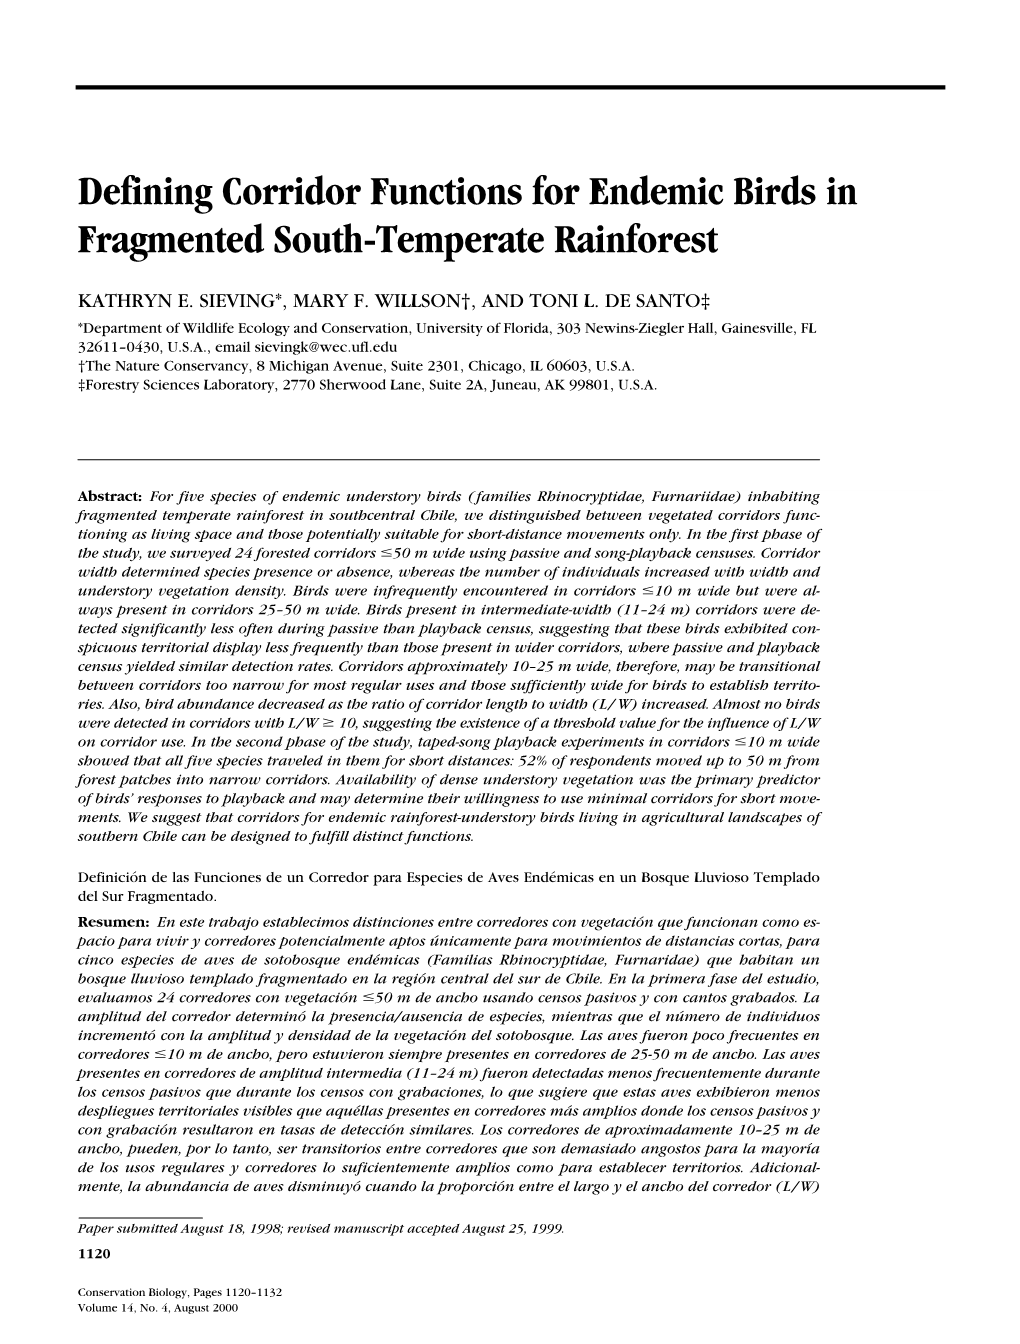 Defining Corridor Functions for Endemic Birds in Fragmented South-Temperate Rainforest